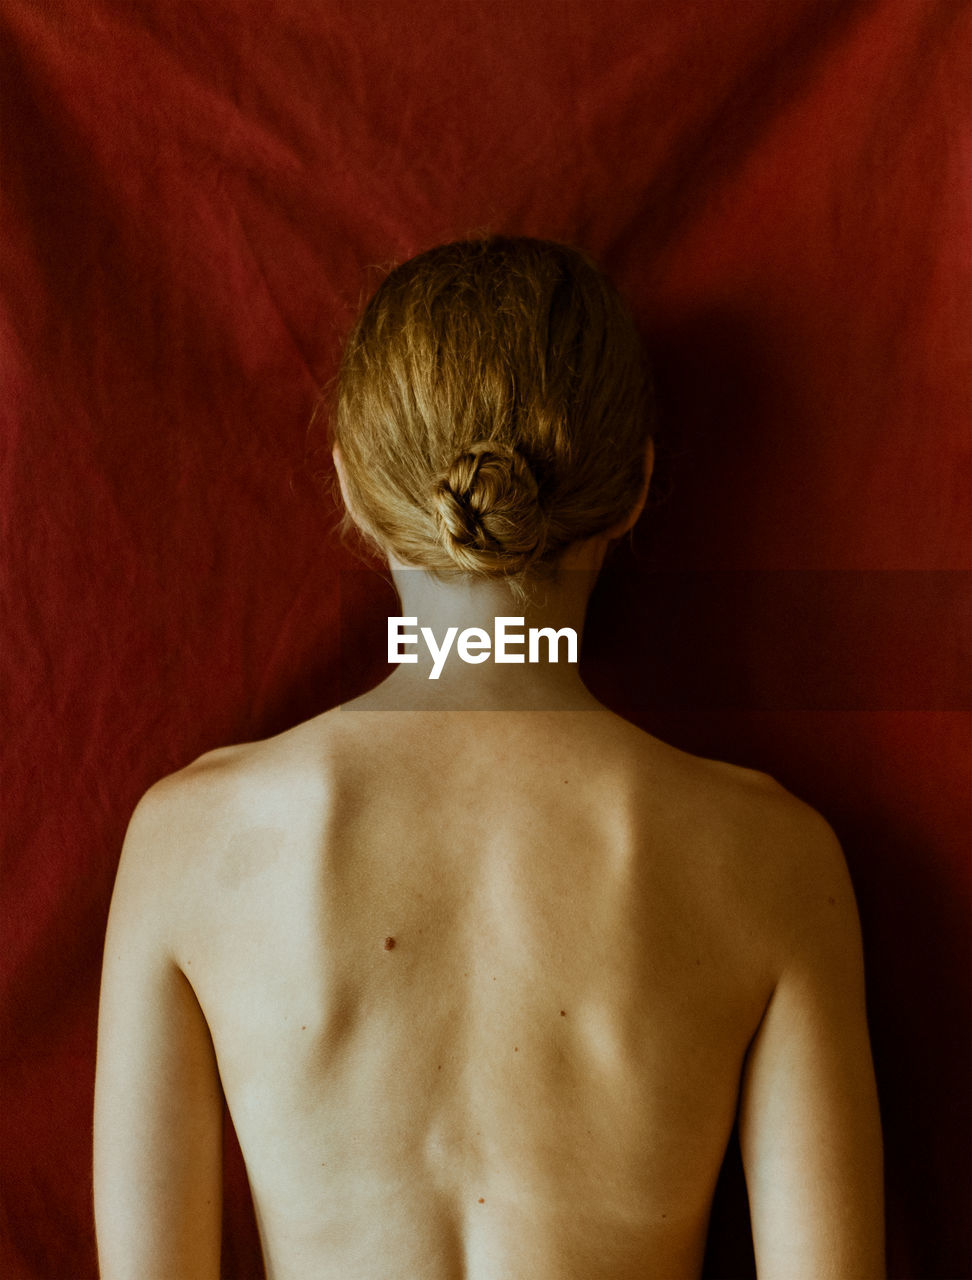 Rear view of shirtless young woman standing against red wall. uncertainty, love, mental health